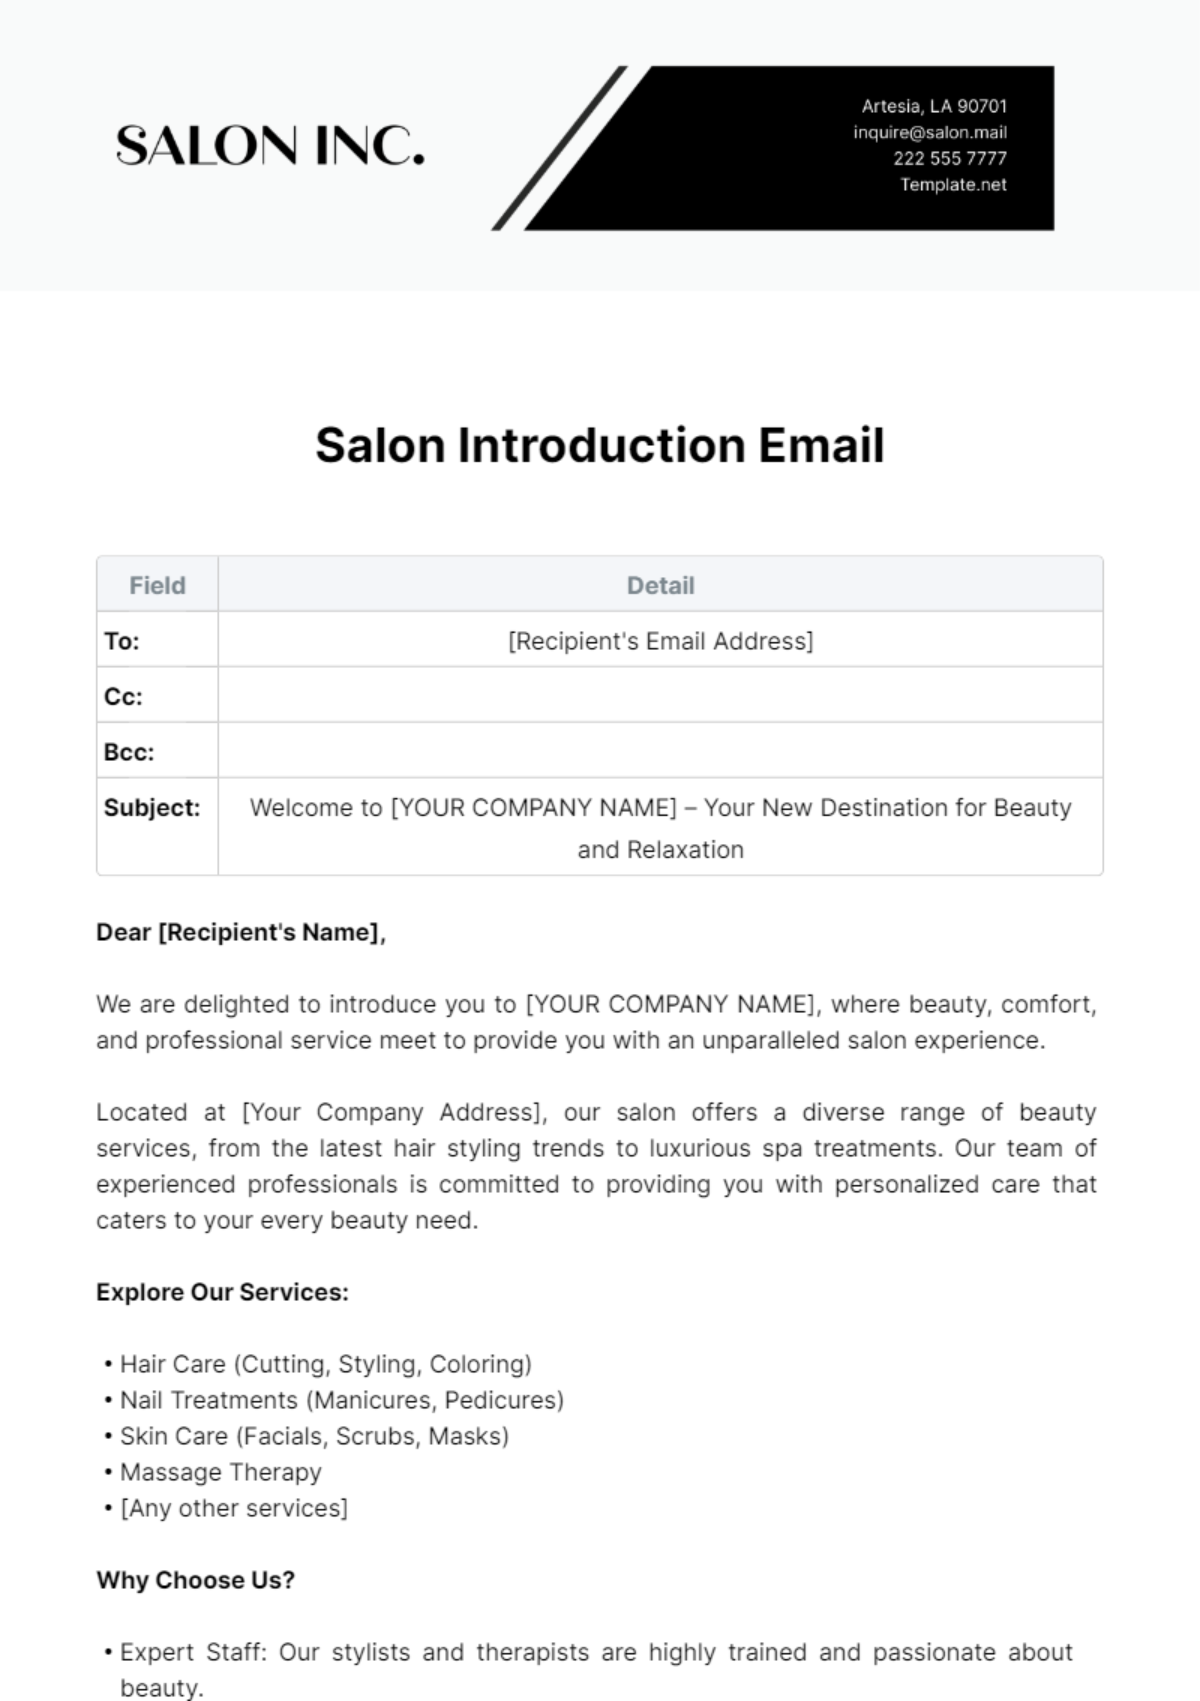 Salon Introduction Email Template